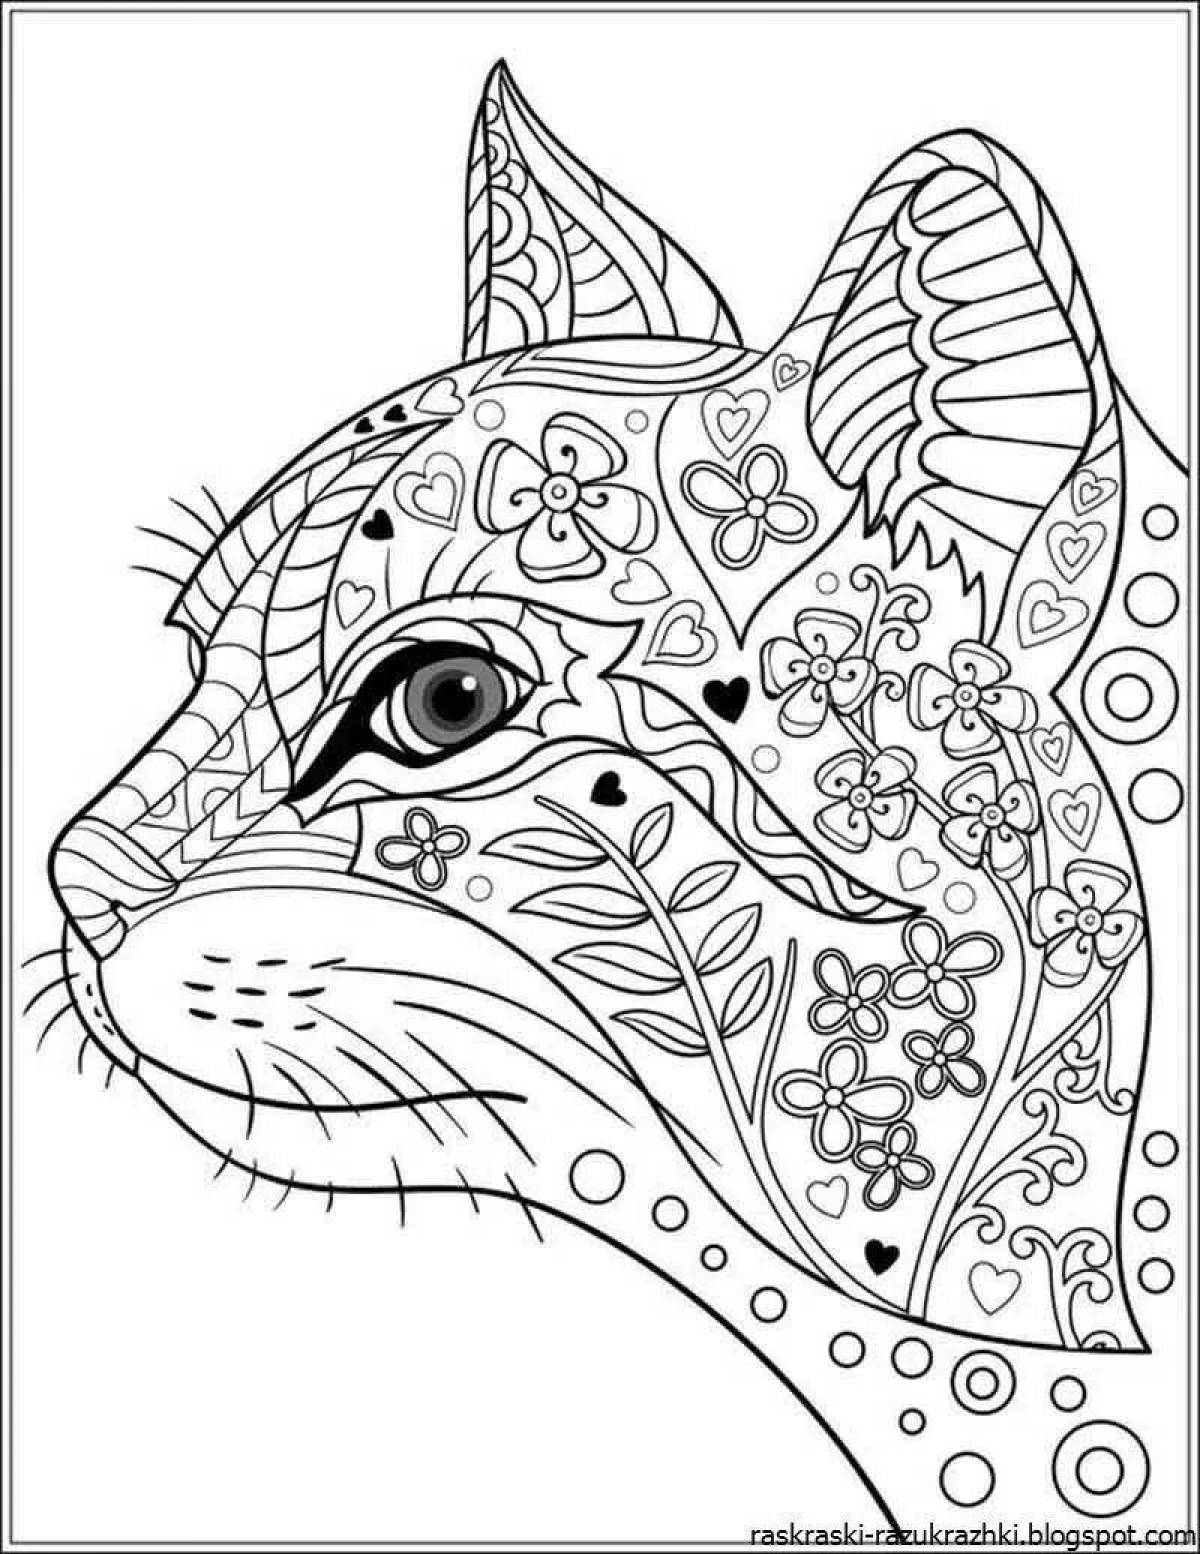 Creative coloring for girls 12 years old animal complex